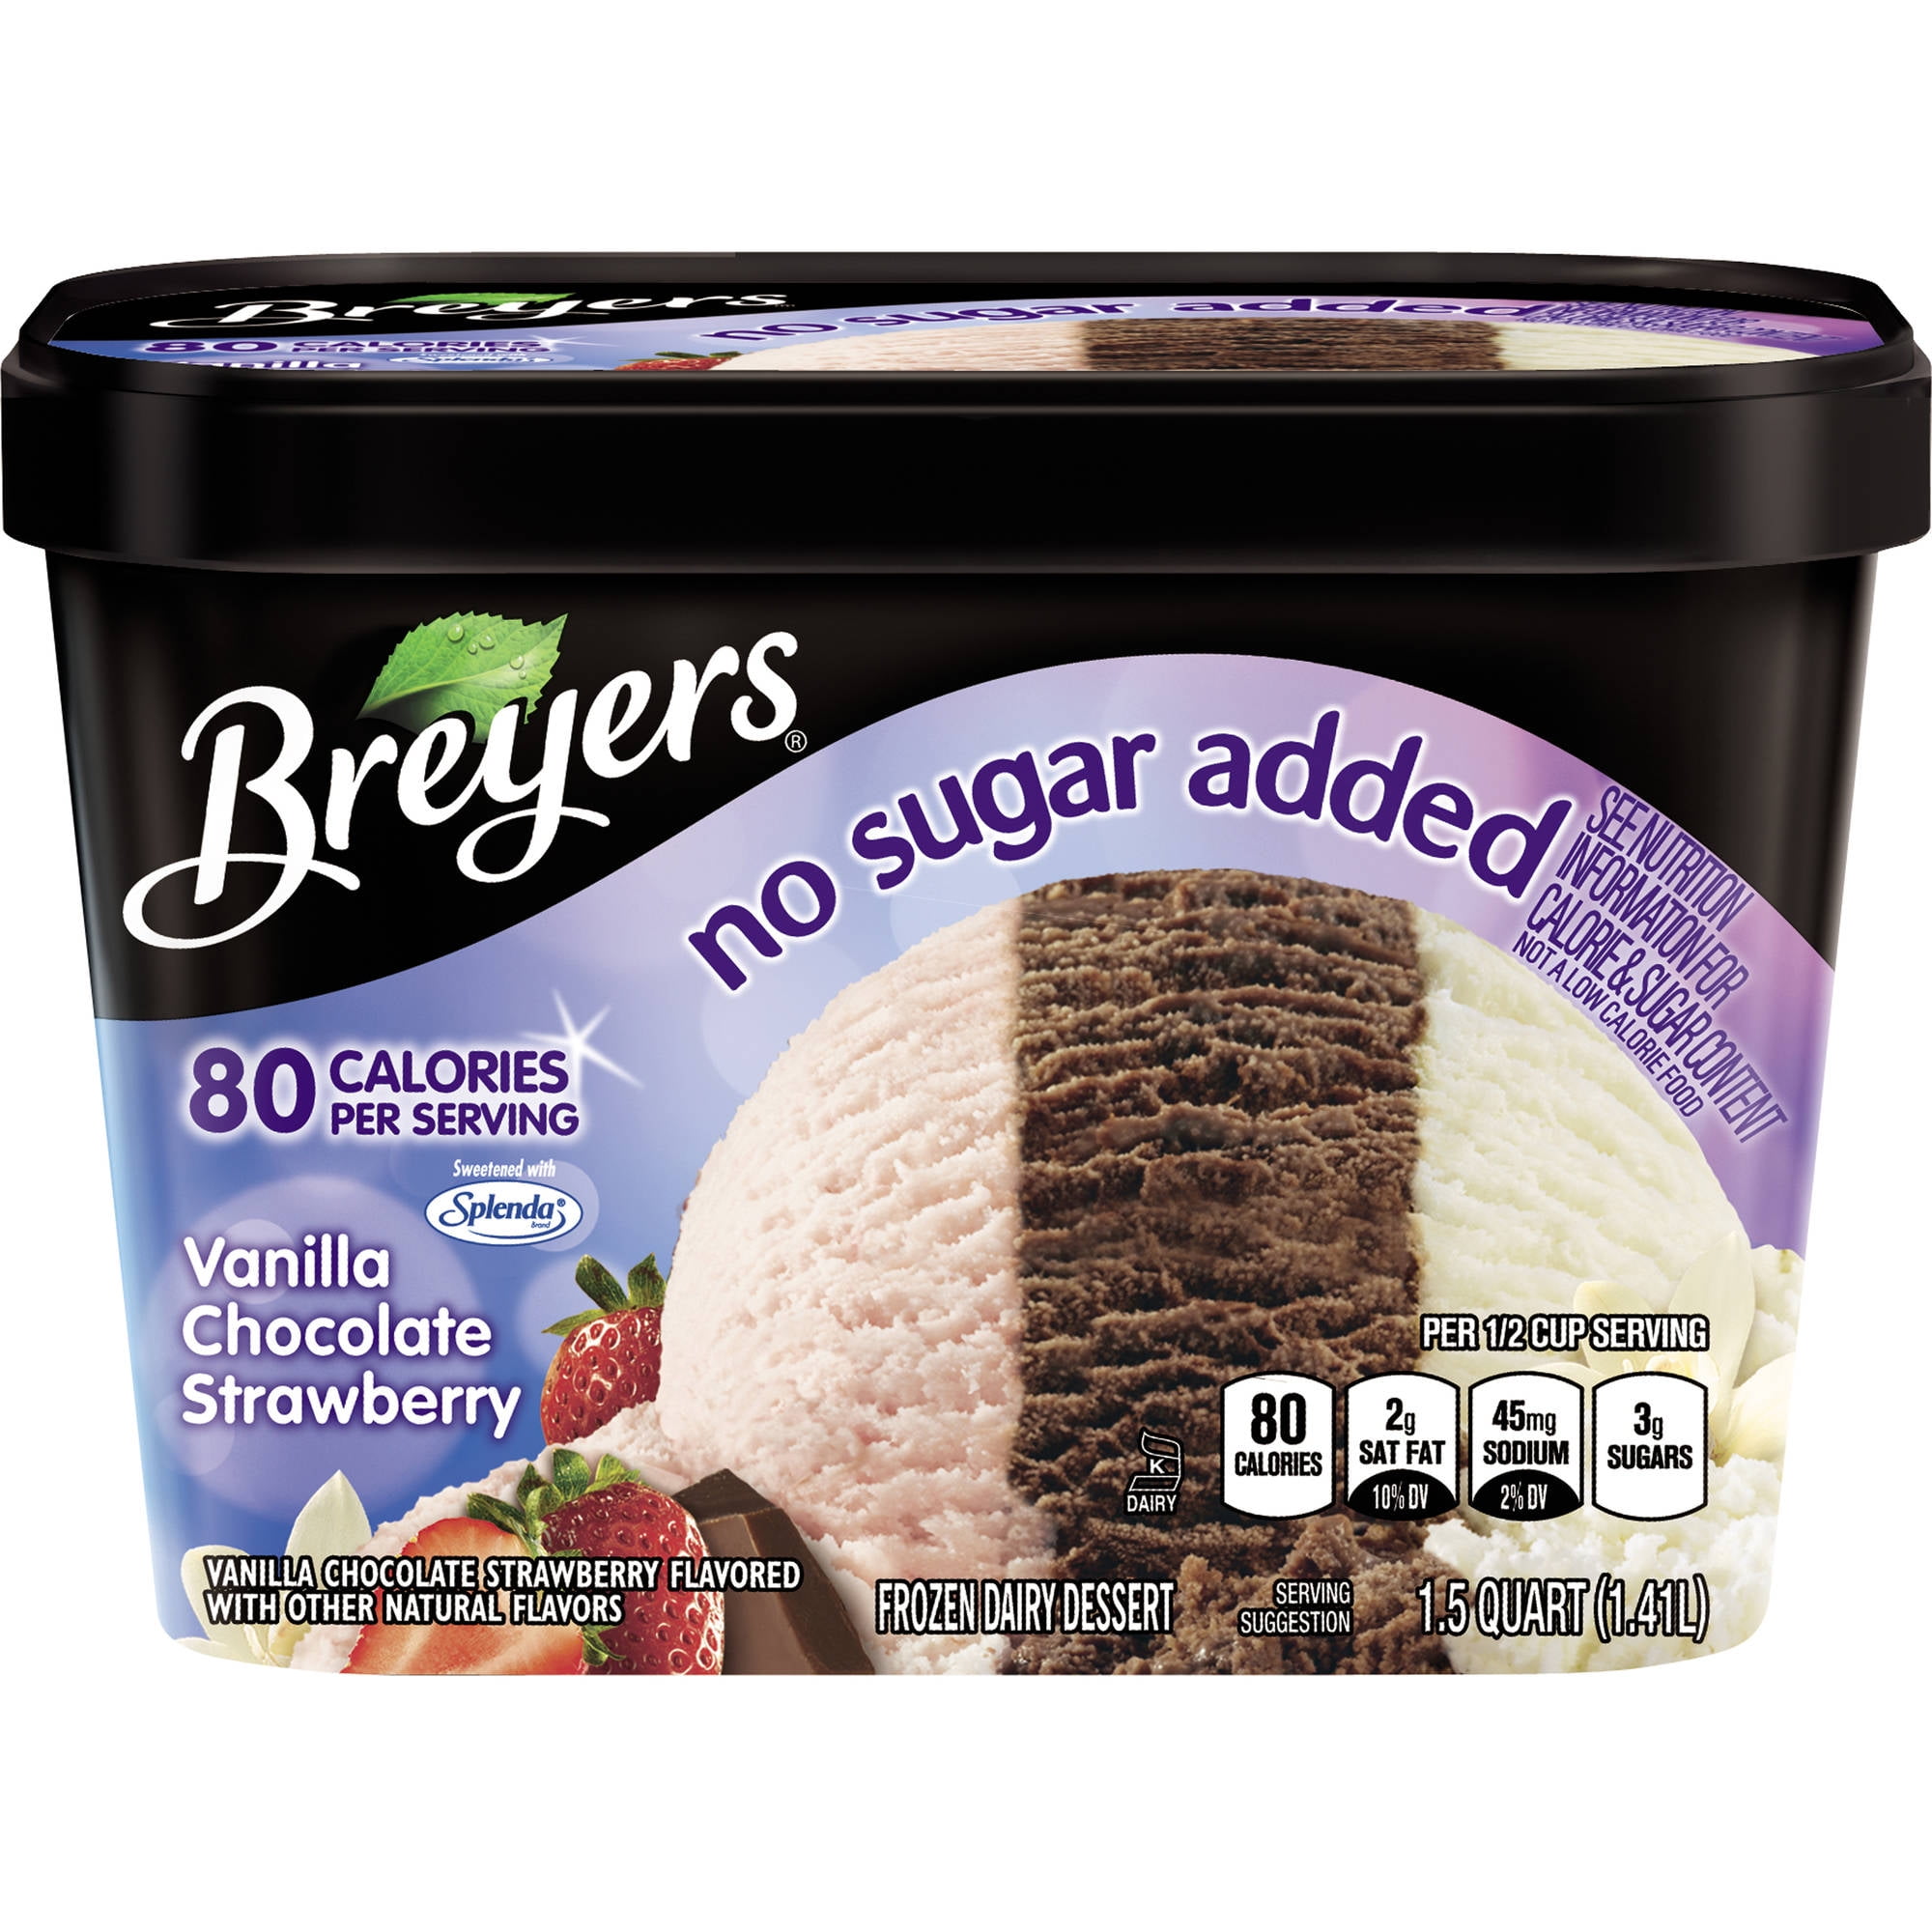 How much fat is there in Breyers ice cream?